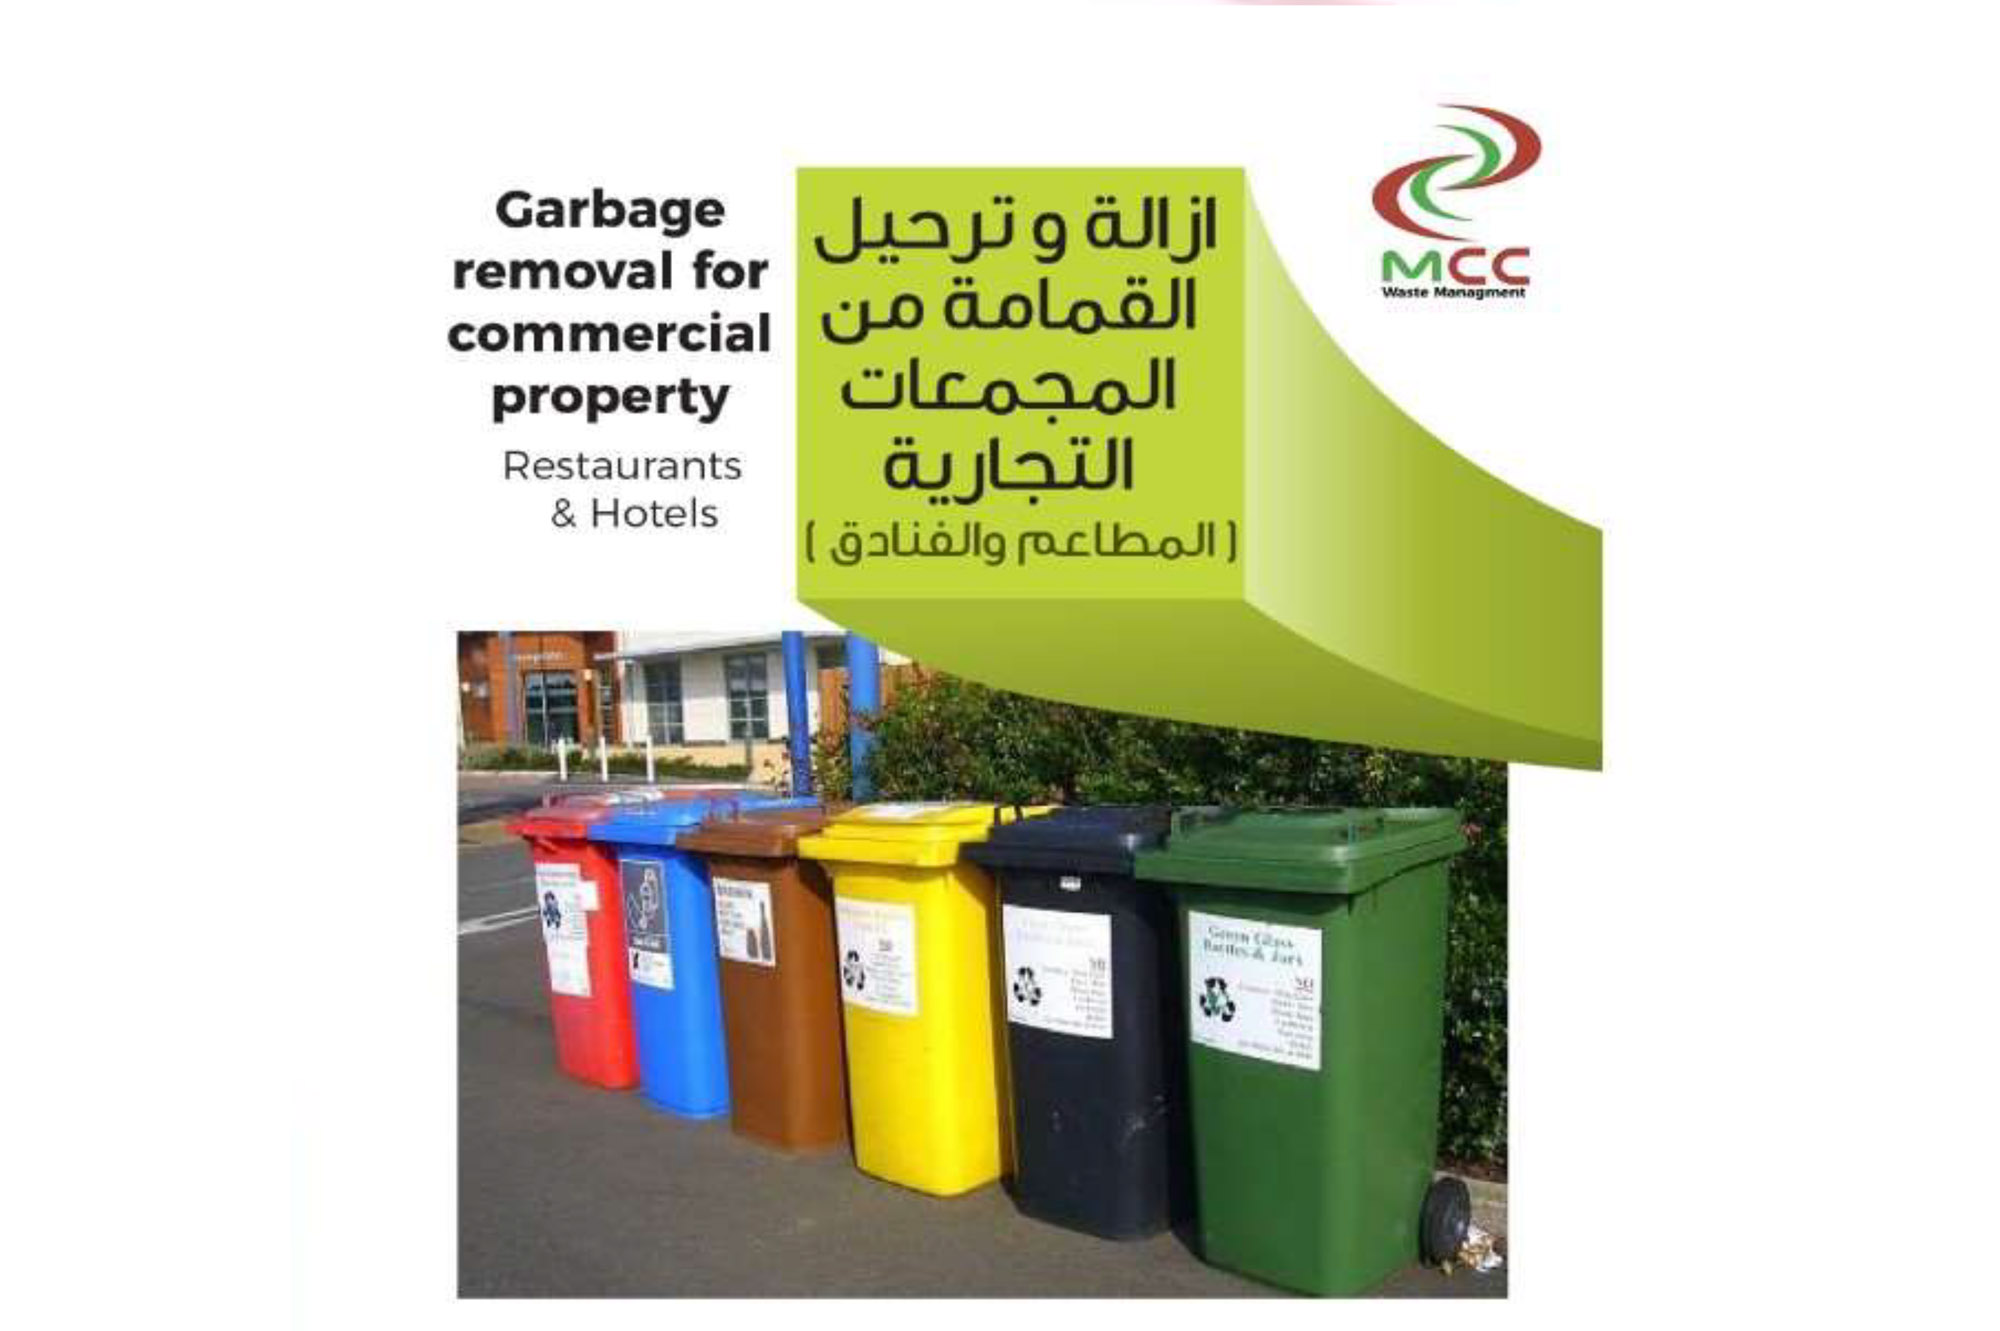 Garbage Removal for Commercial Property in Qatar